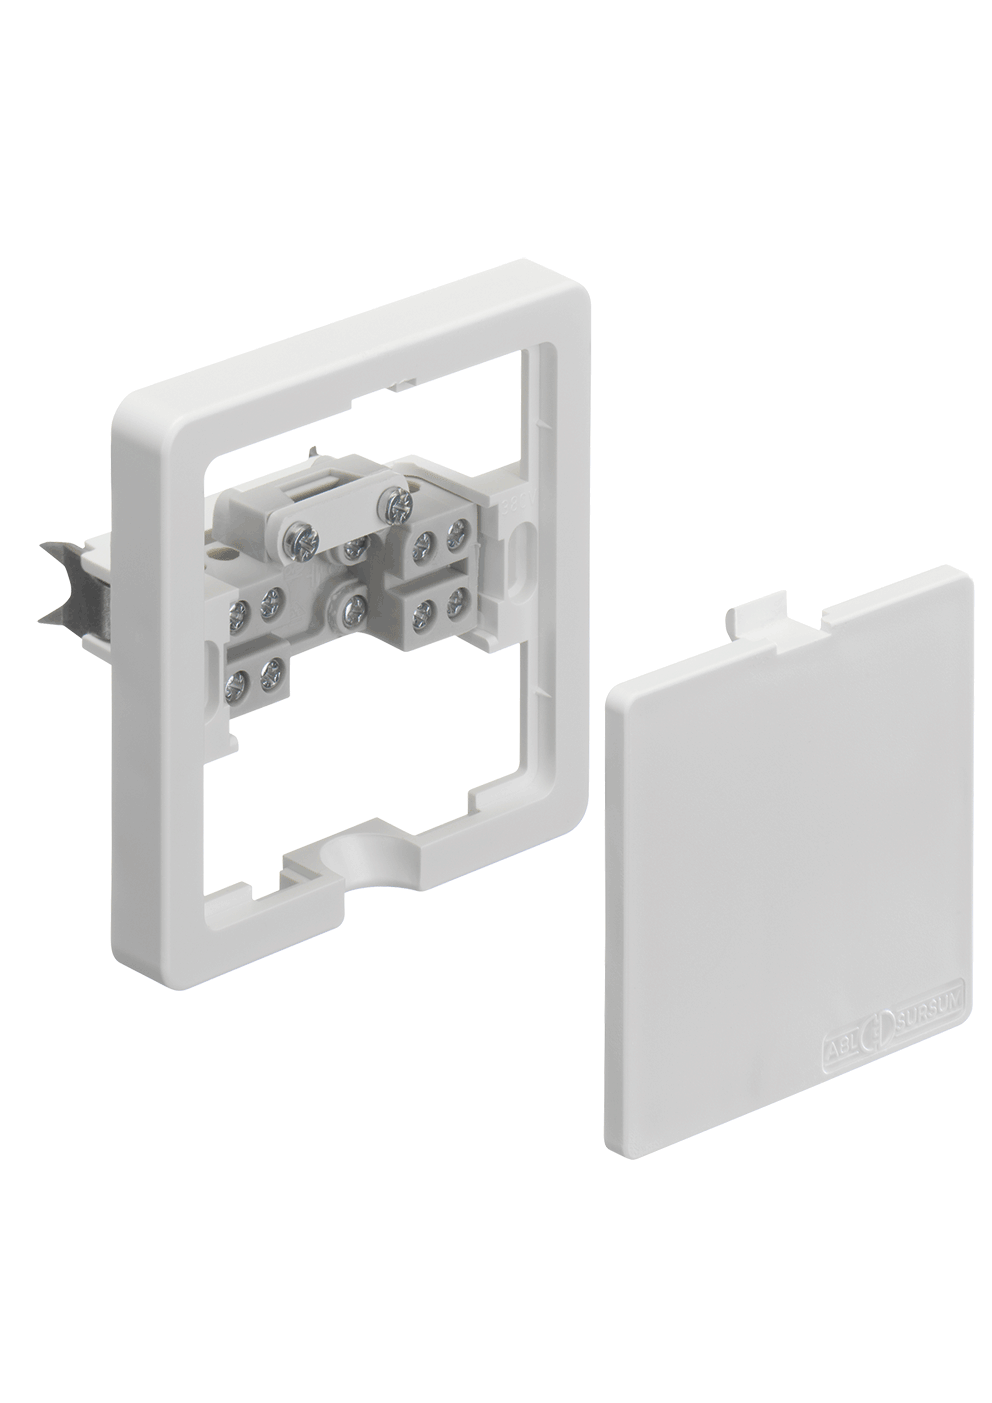 Dedicated socket, low-rise, claw mounted, flush mounted, white